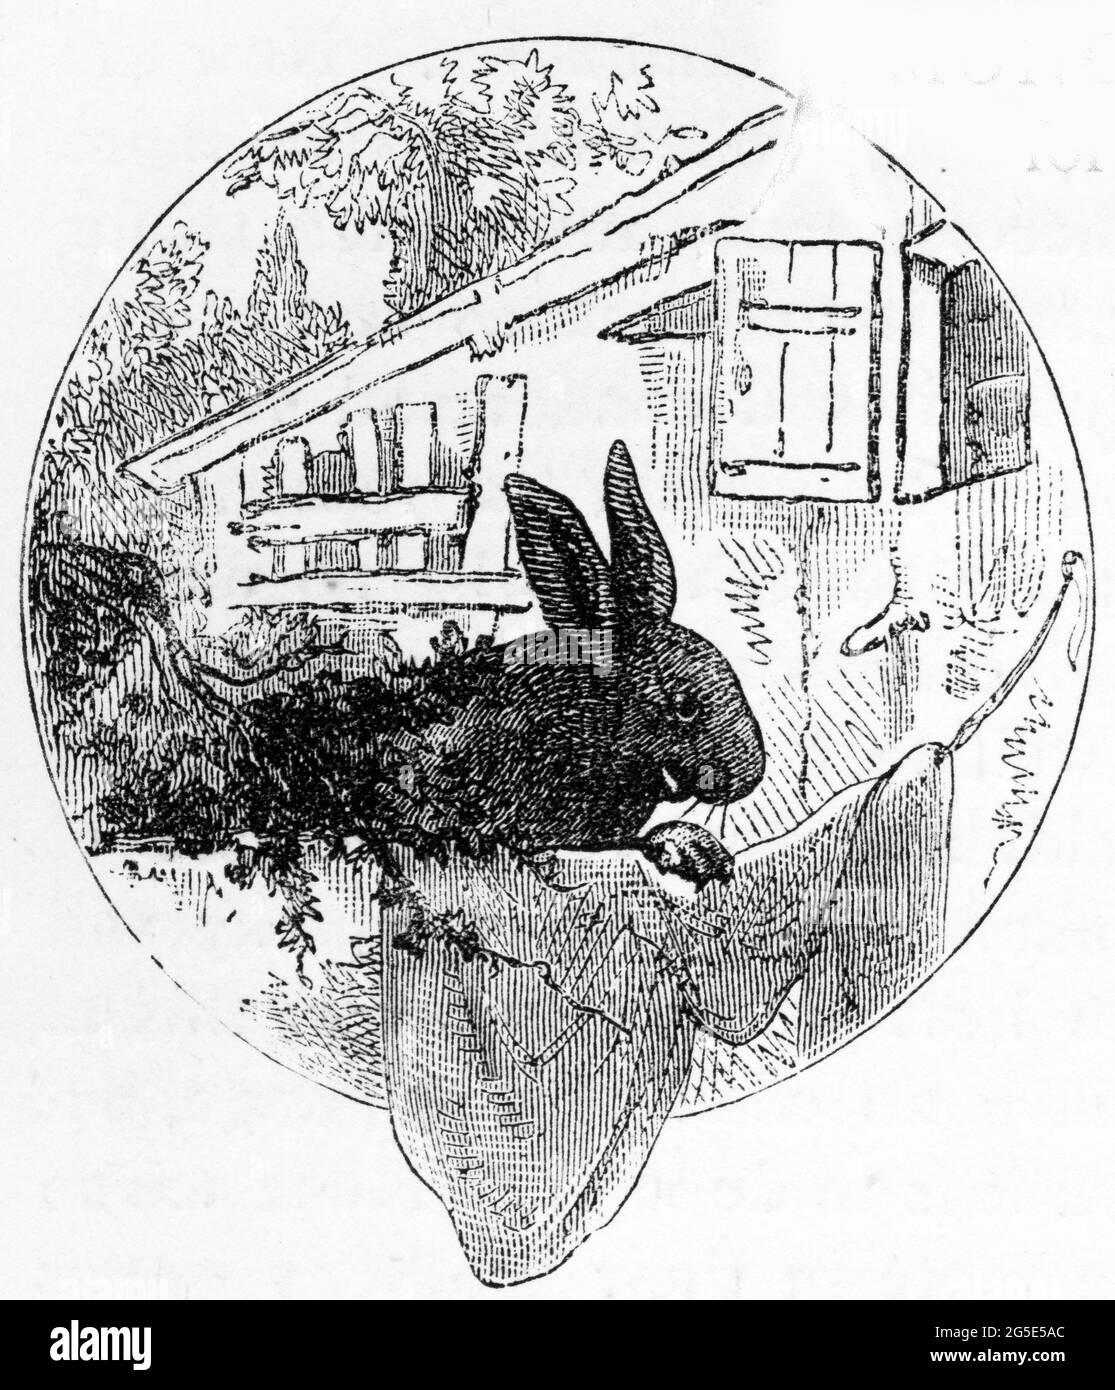 Engraving of a pet rabbit near its hutch Stock Photo